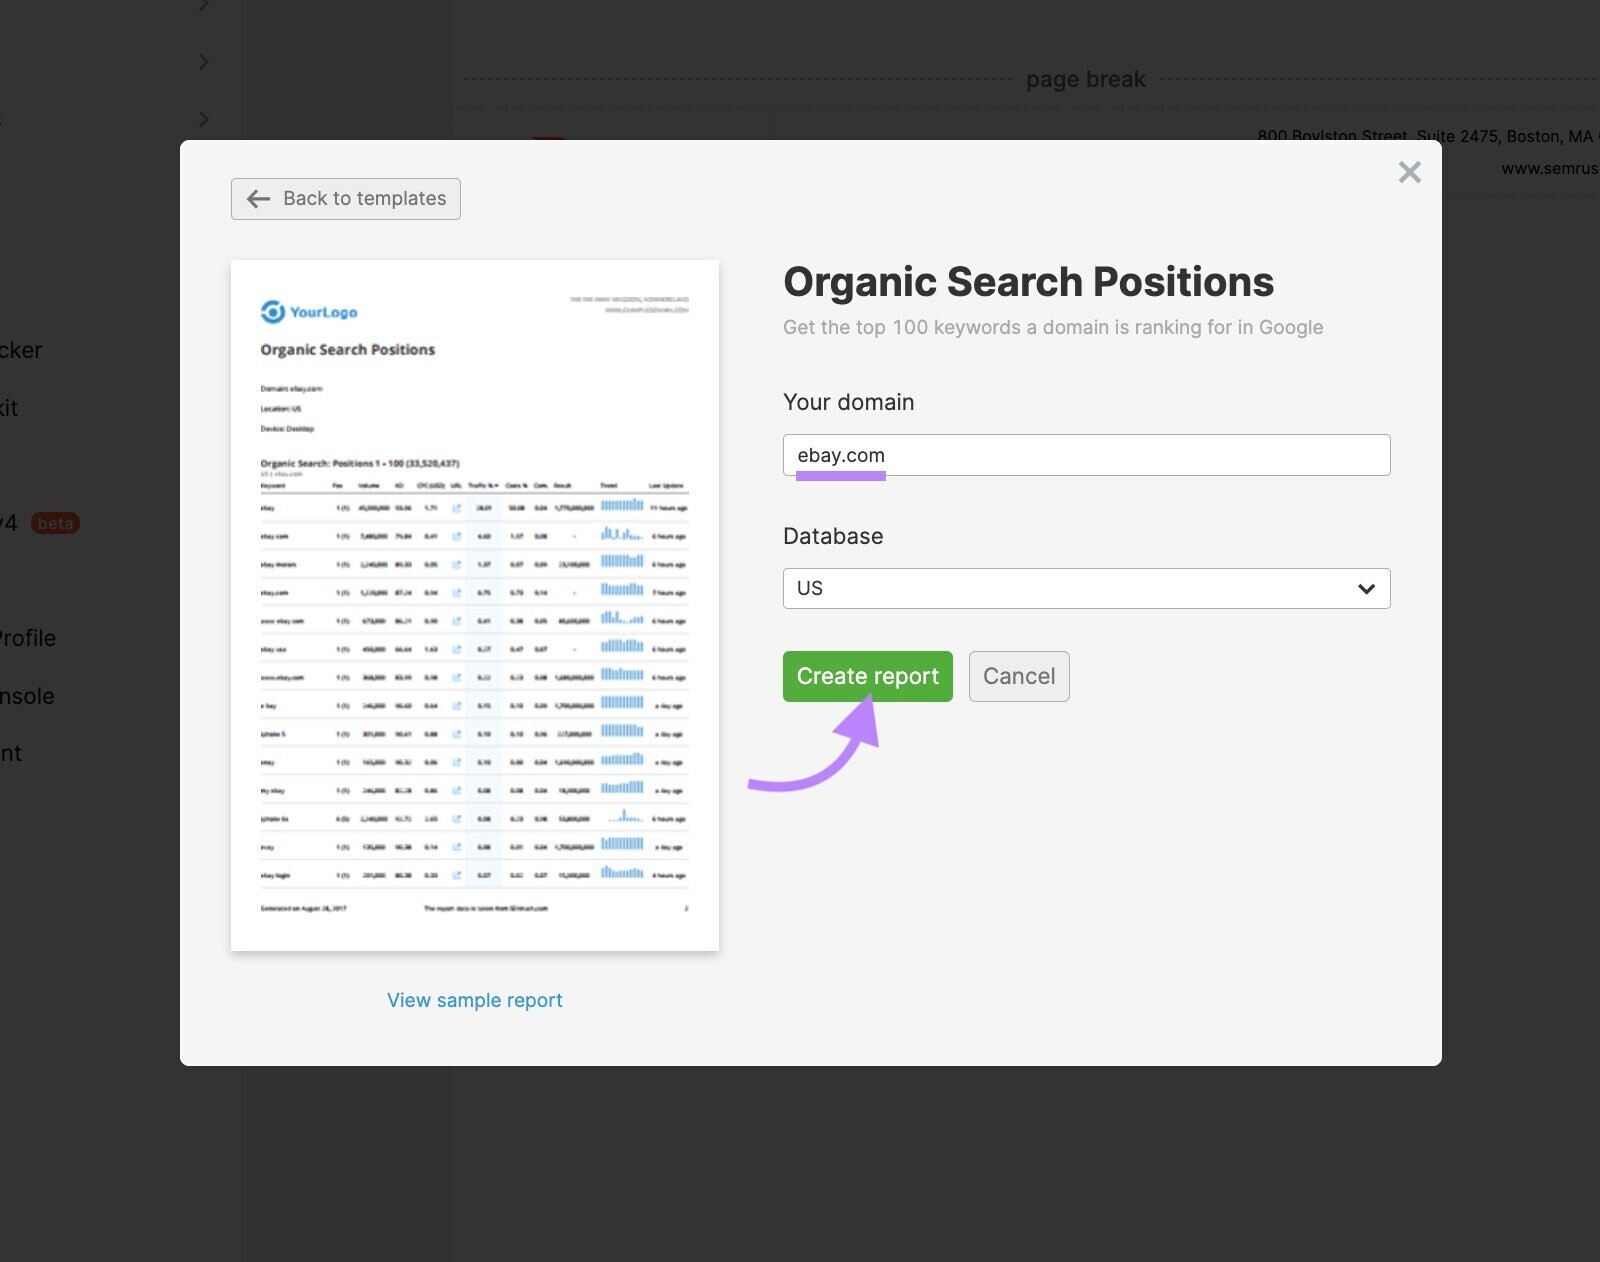 “Organic Search Positions” popup window